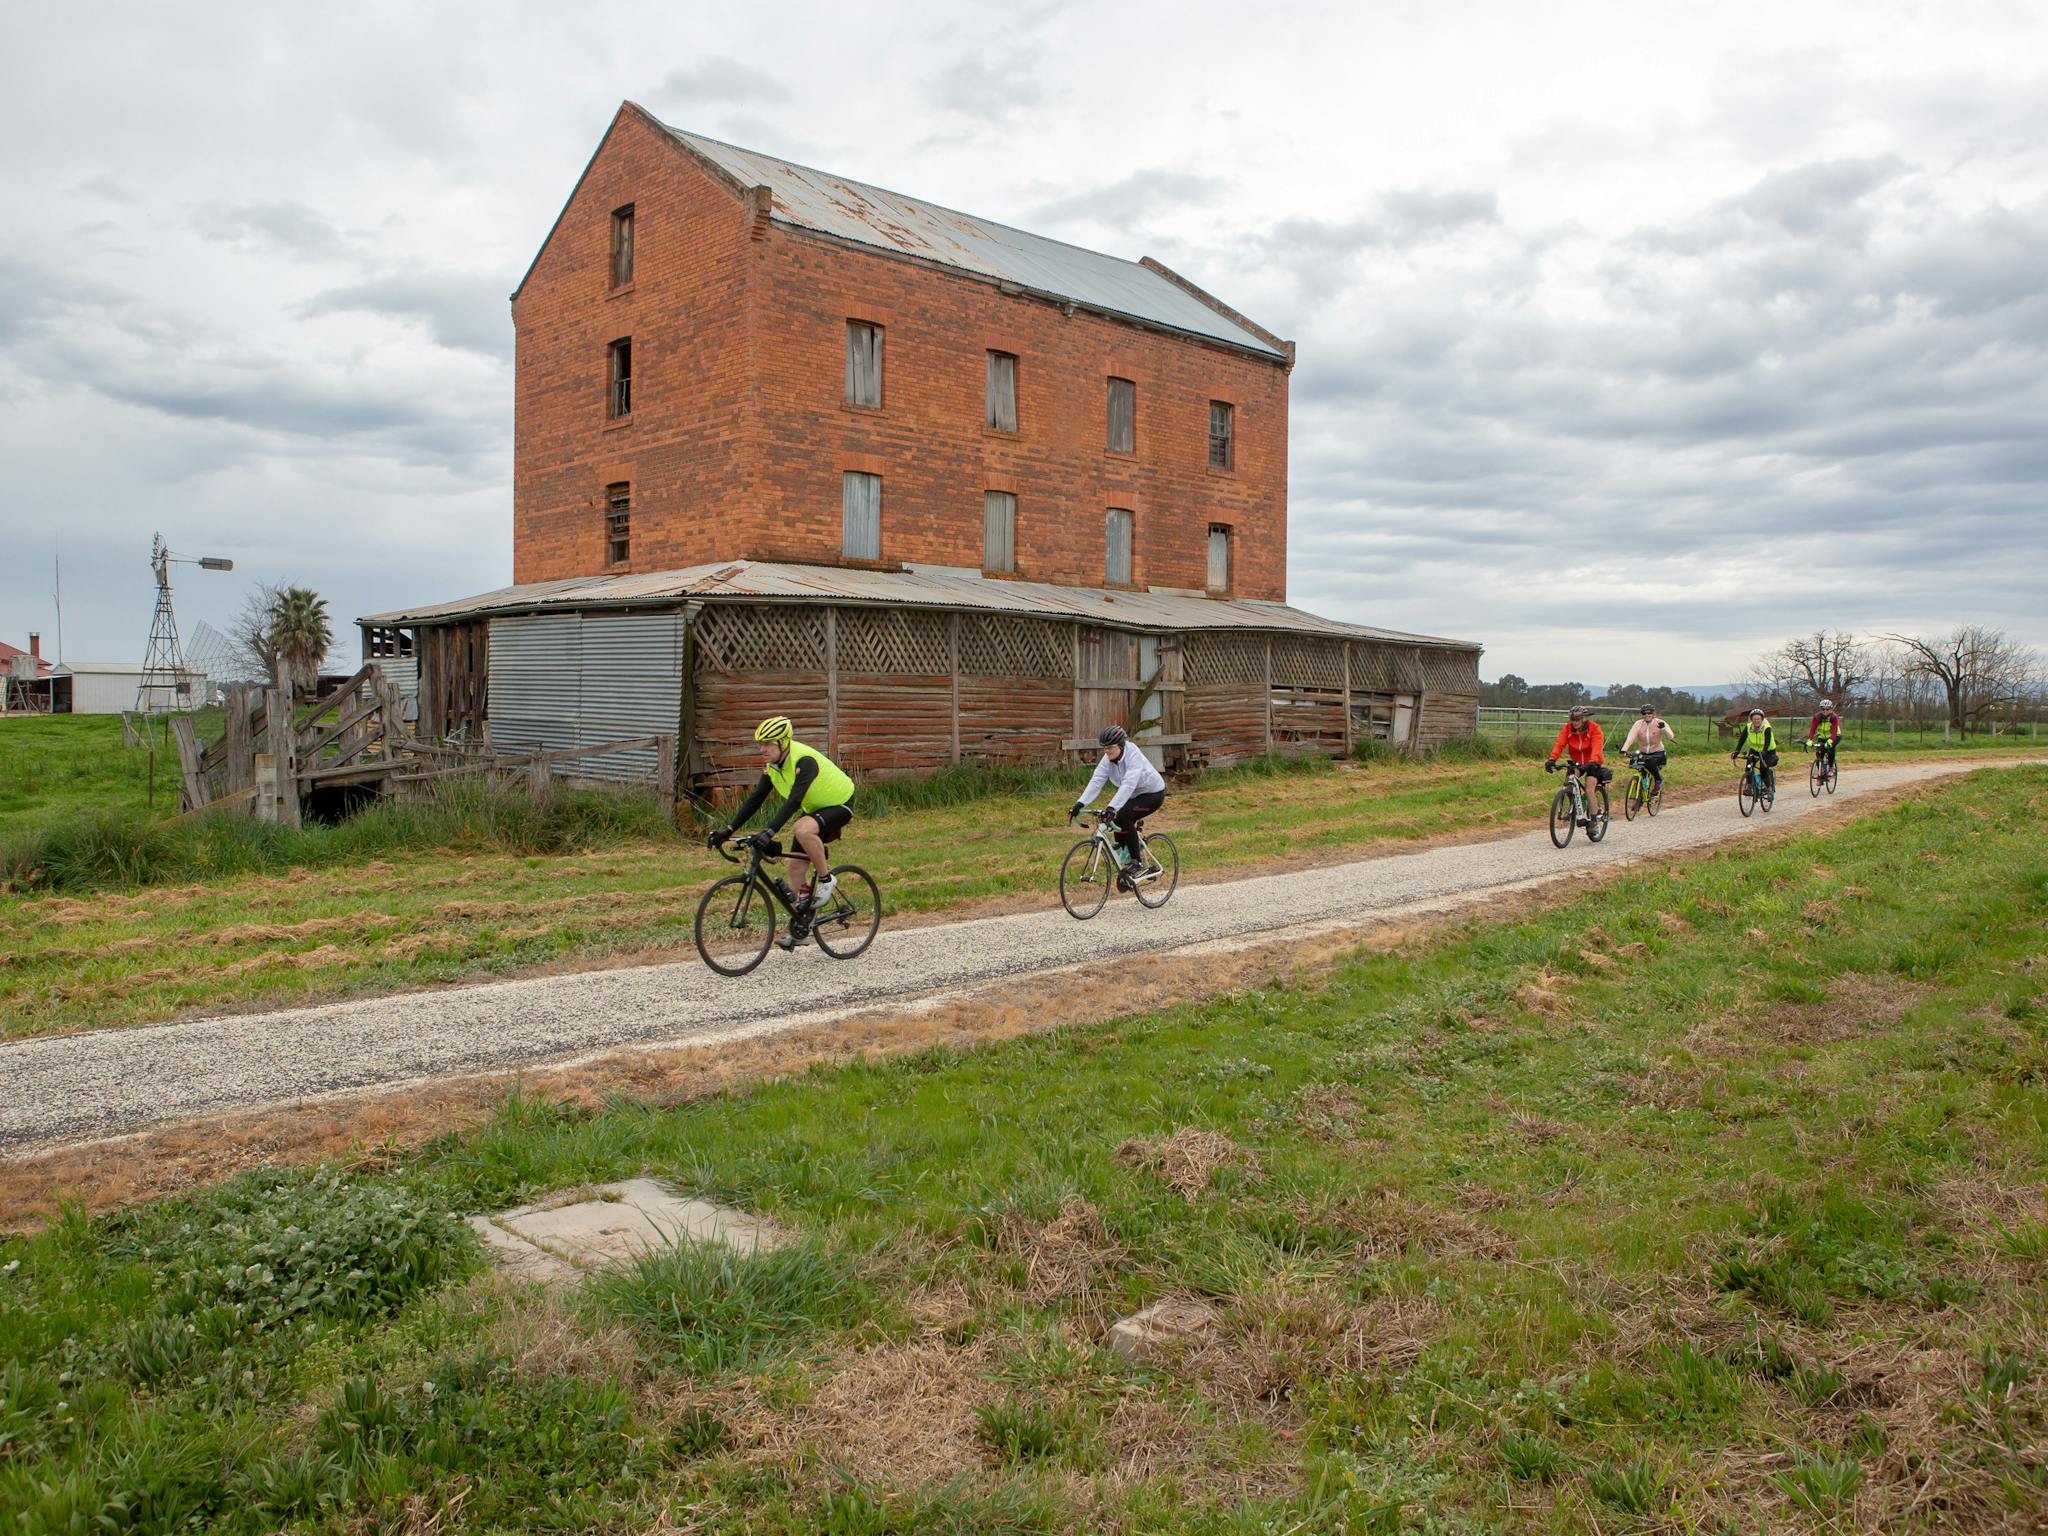 6 cyclists passing the abandoned mill